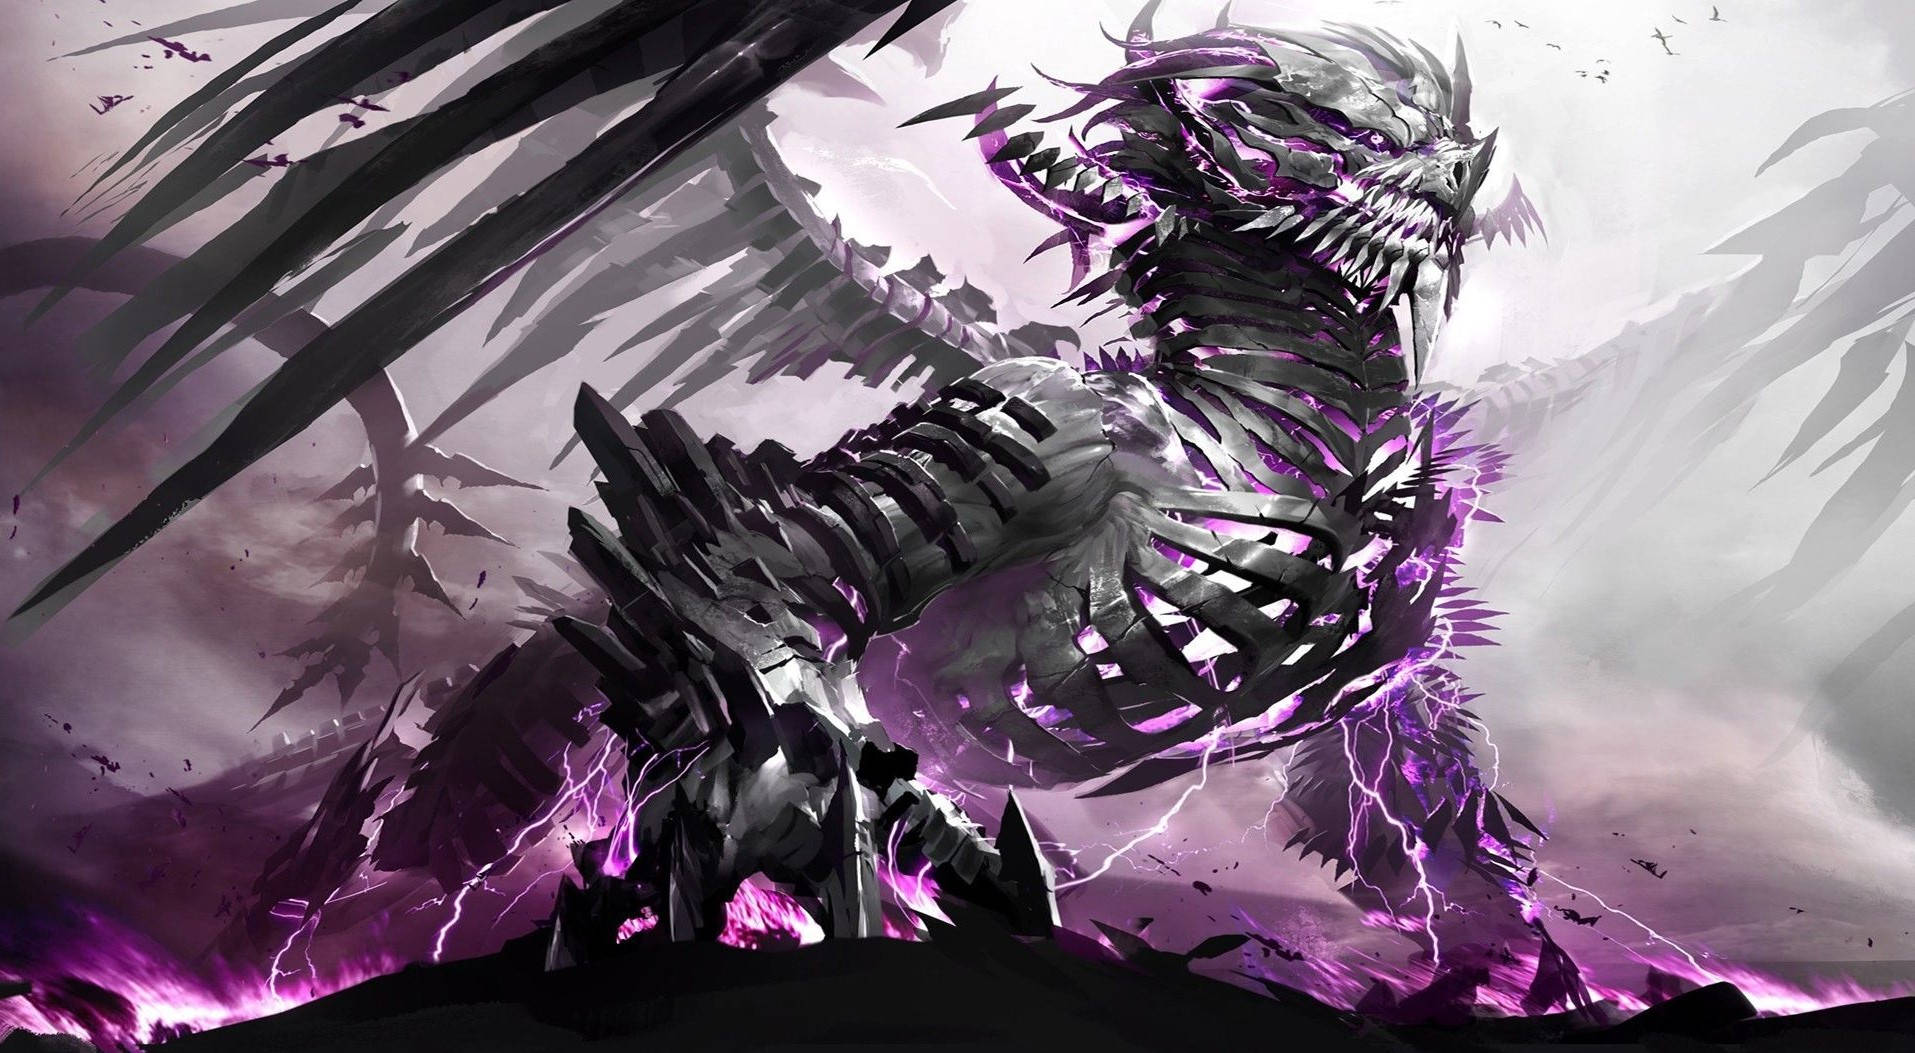 Coolest Dragon From Guild Wars 2 Wallpaper